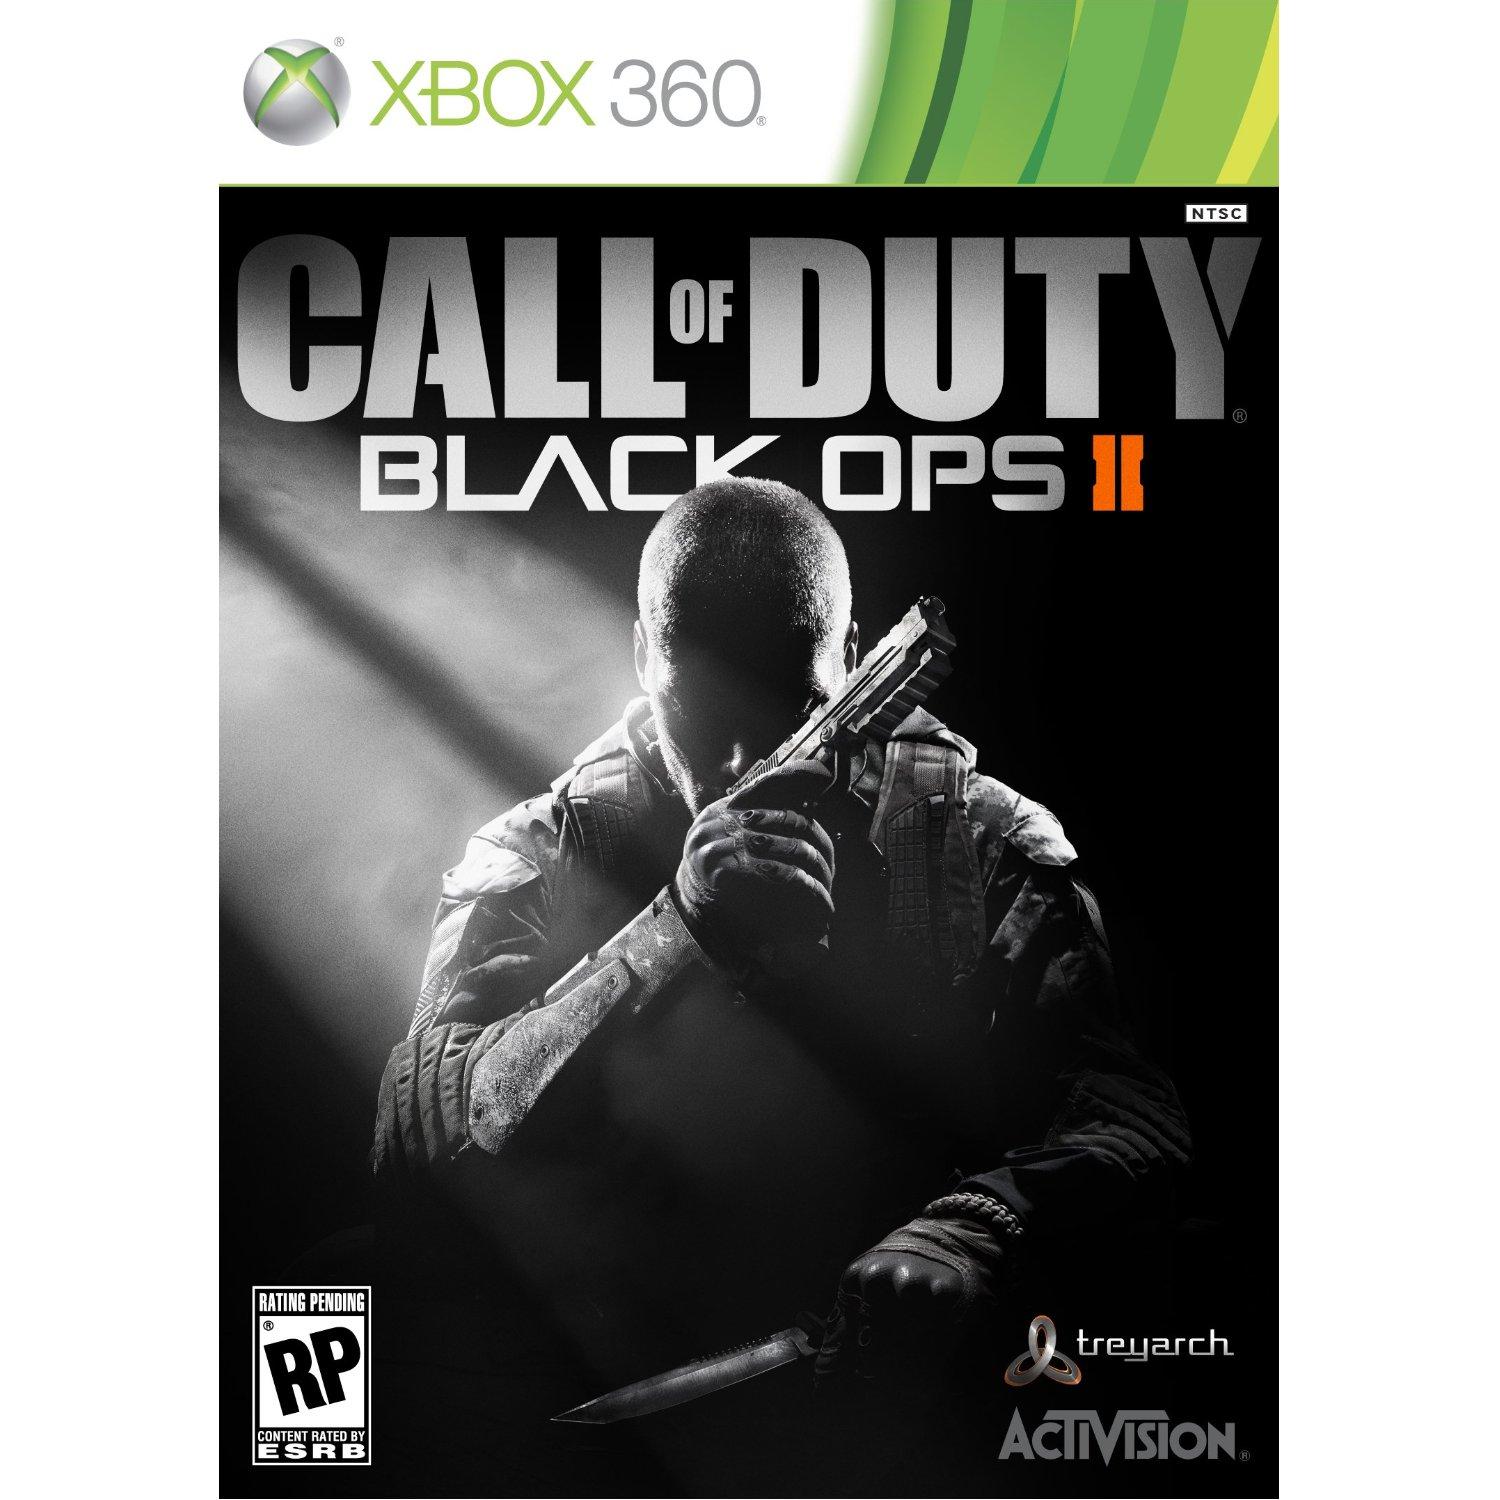 CALL OF DUTY BLACK OPS 2